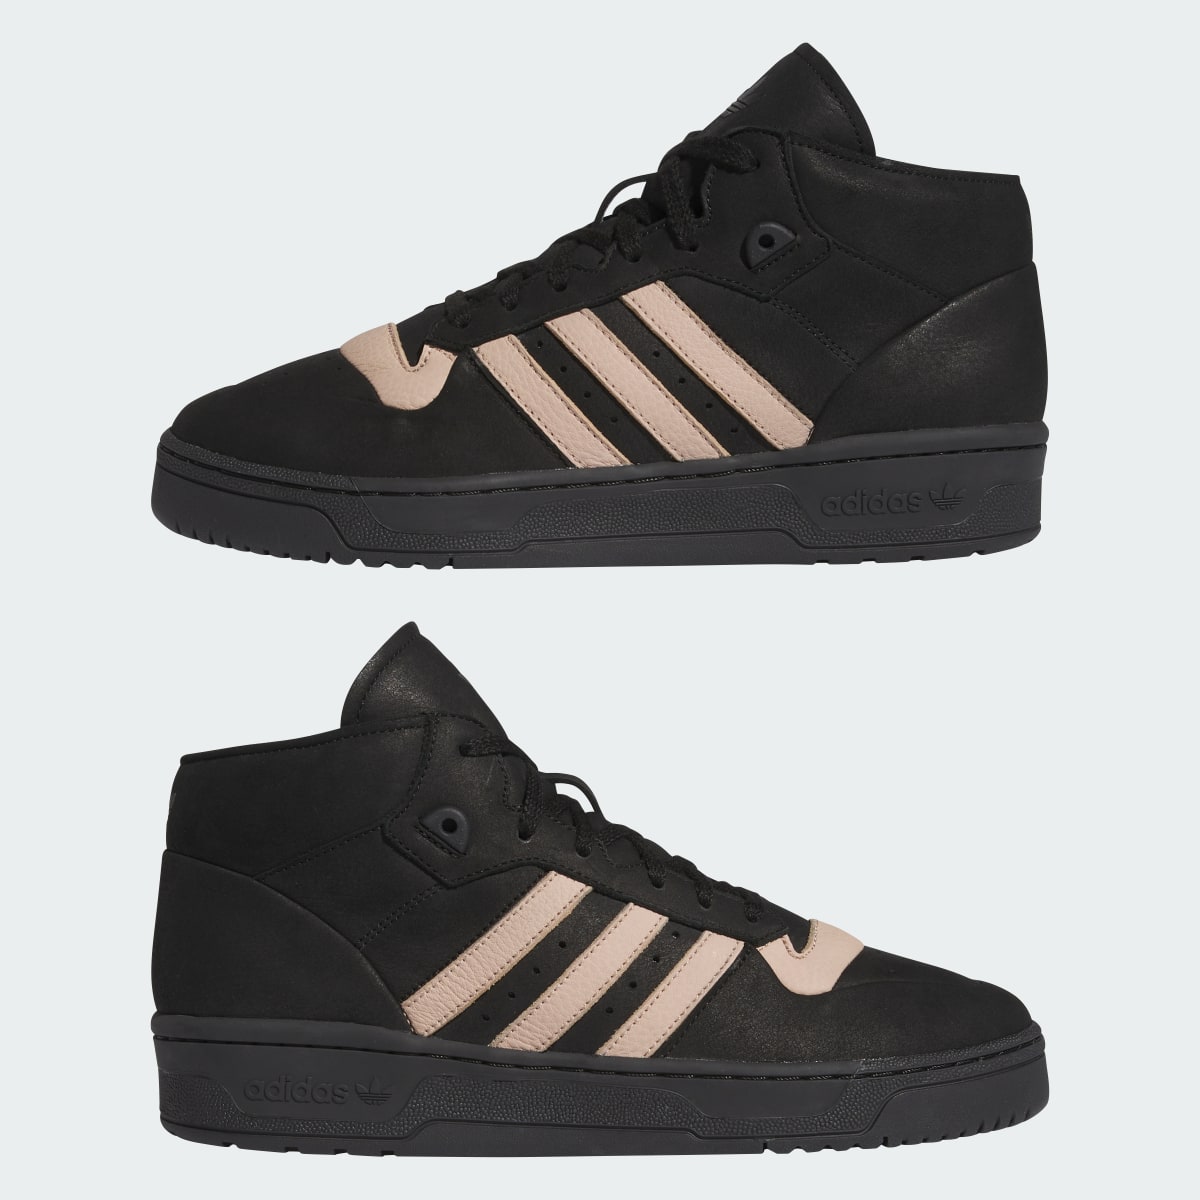 Adidas Rivalry Mid 001 Shoes. 8